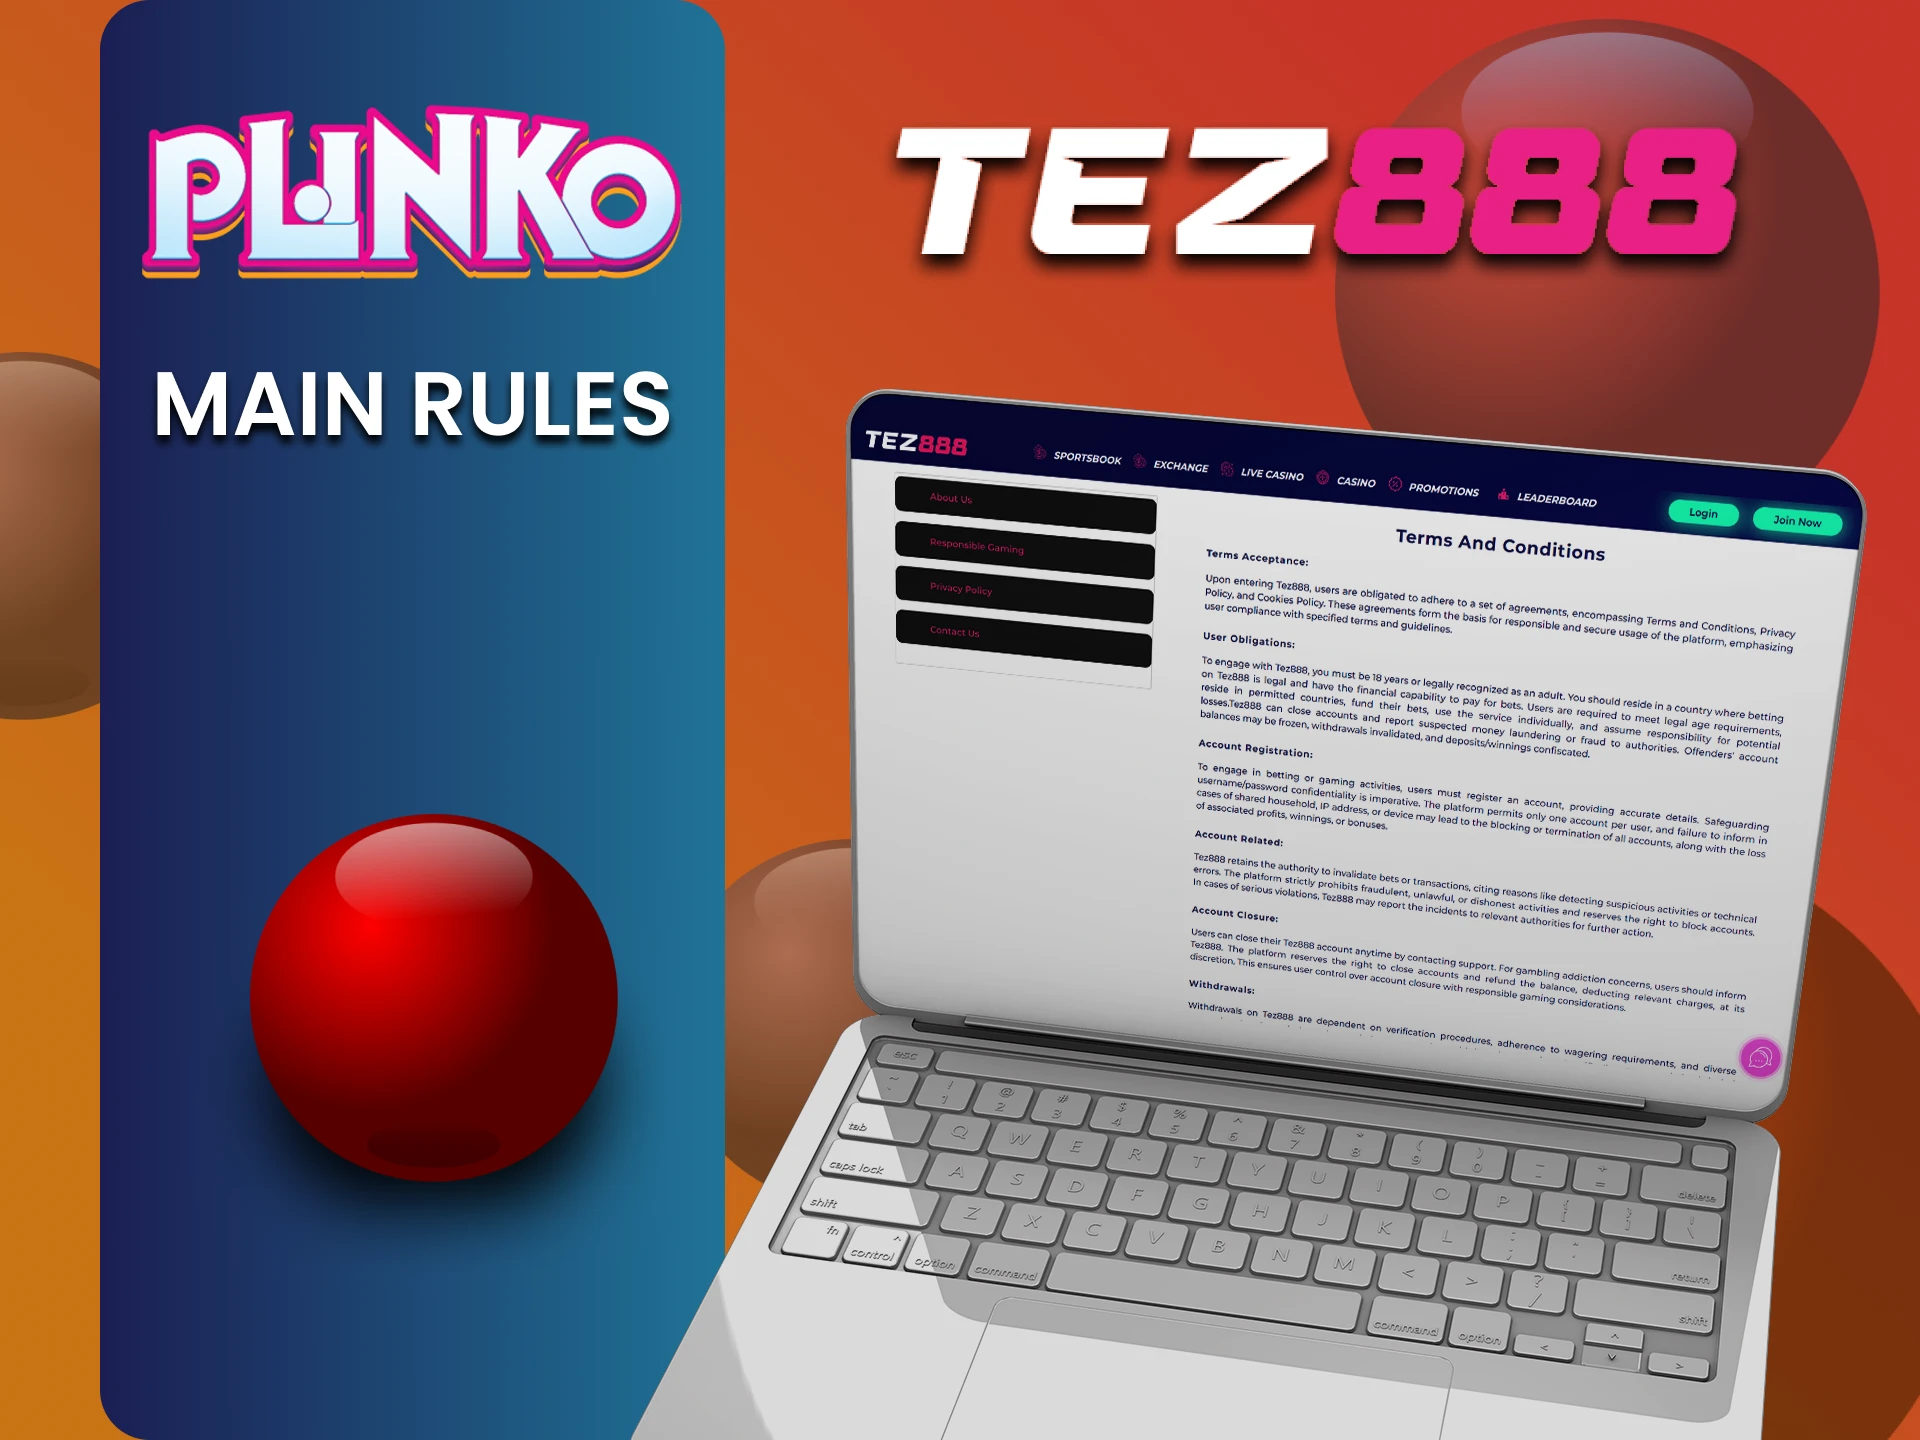 The Tez888 website has rules that you should study before playing Plinko.